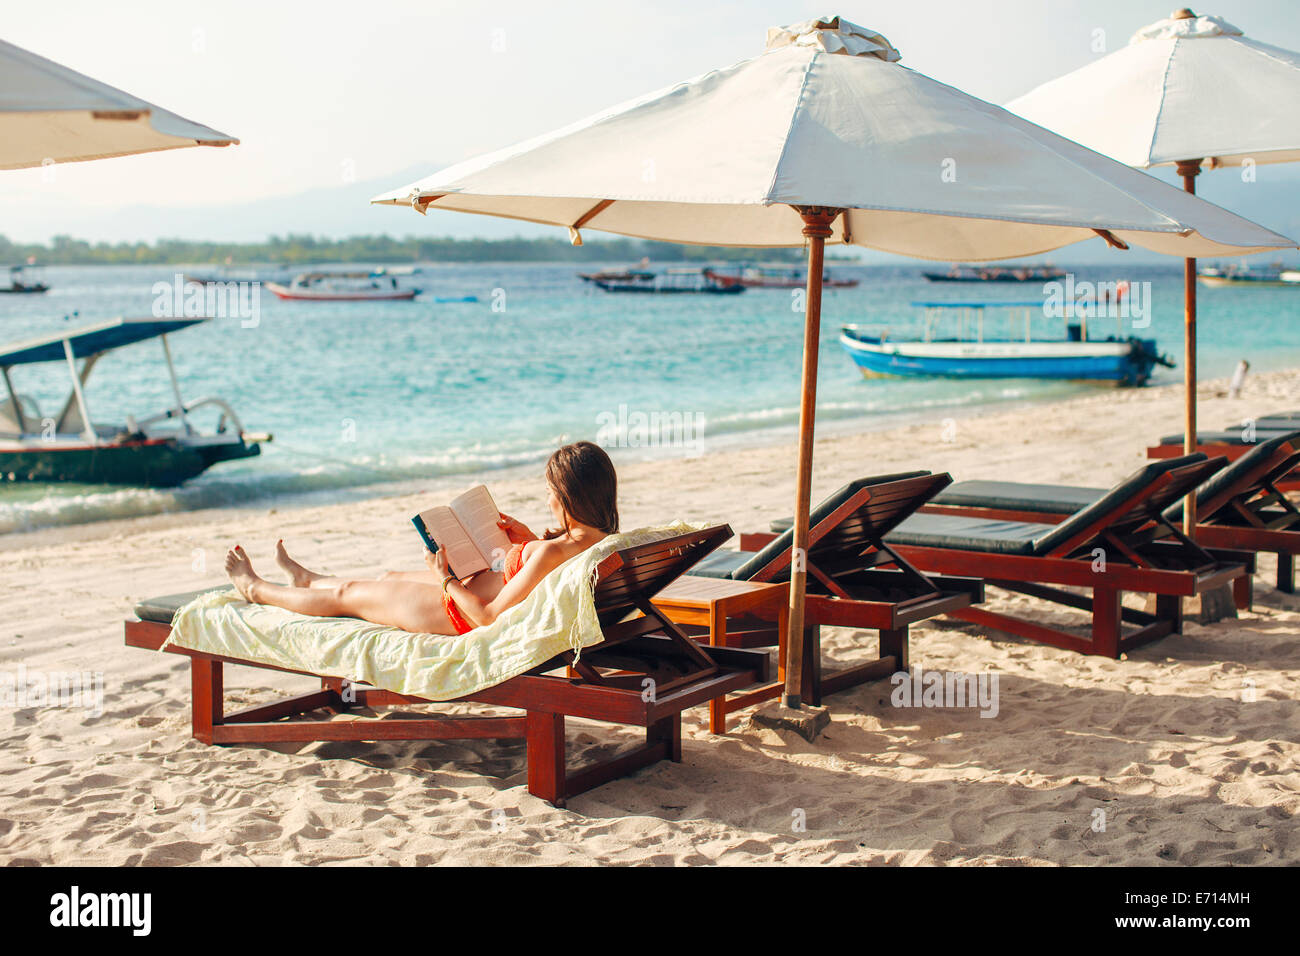 Indonesia, Gili Islands, woman lying on a beach chair reading a book Stock Photo